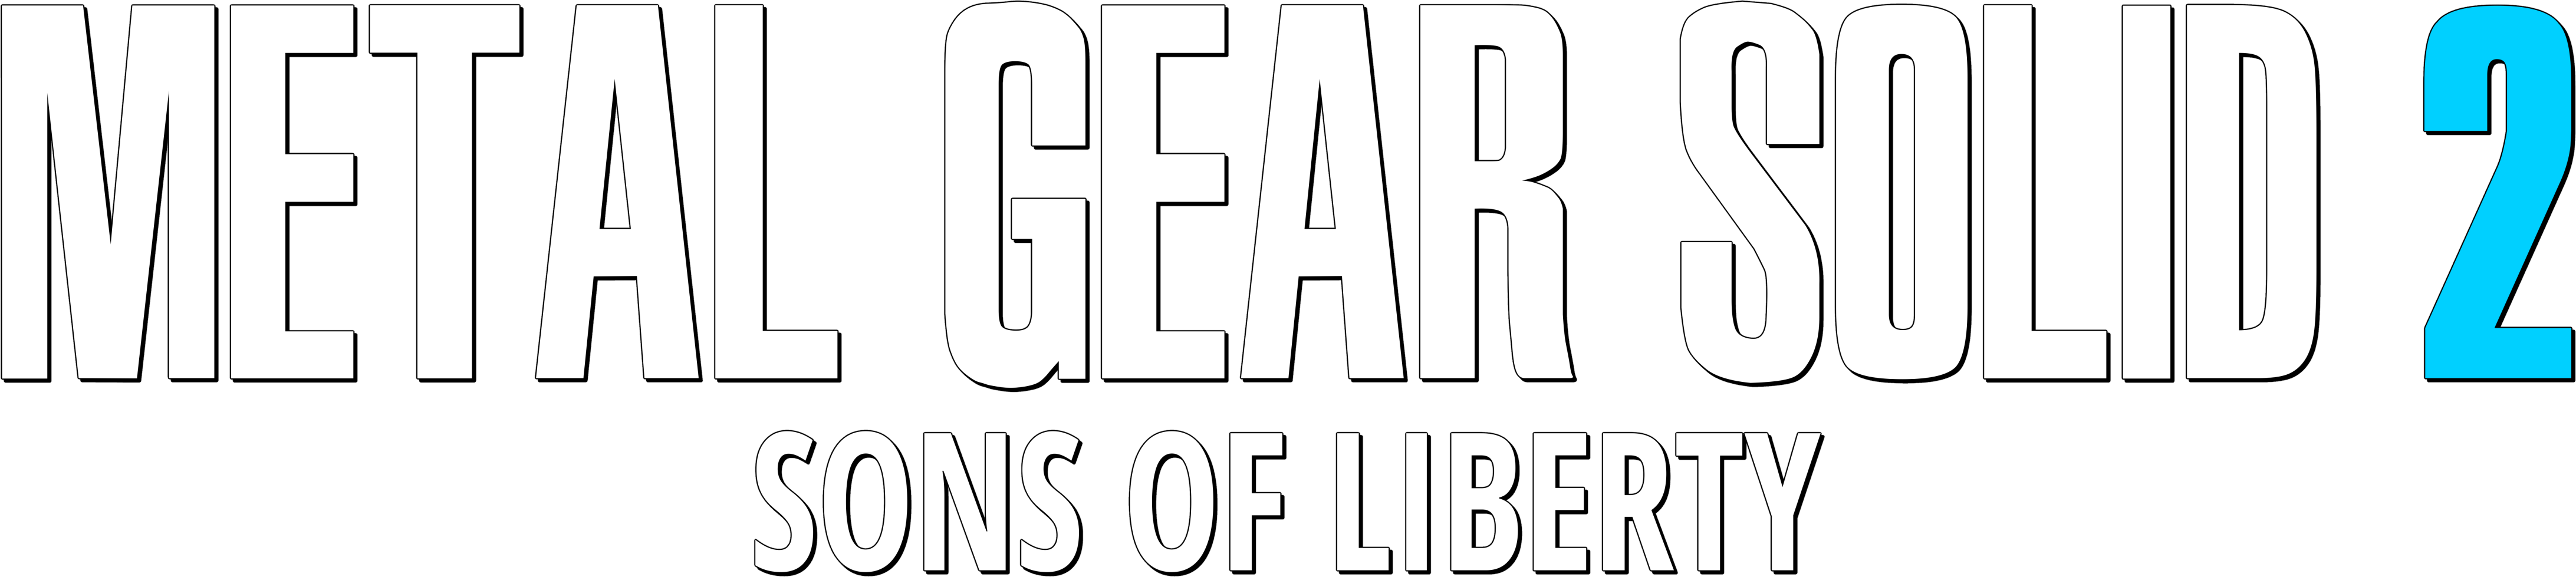 Metal Gear Solid 2 Sons Of Liberty Logo PNG Photos